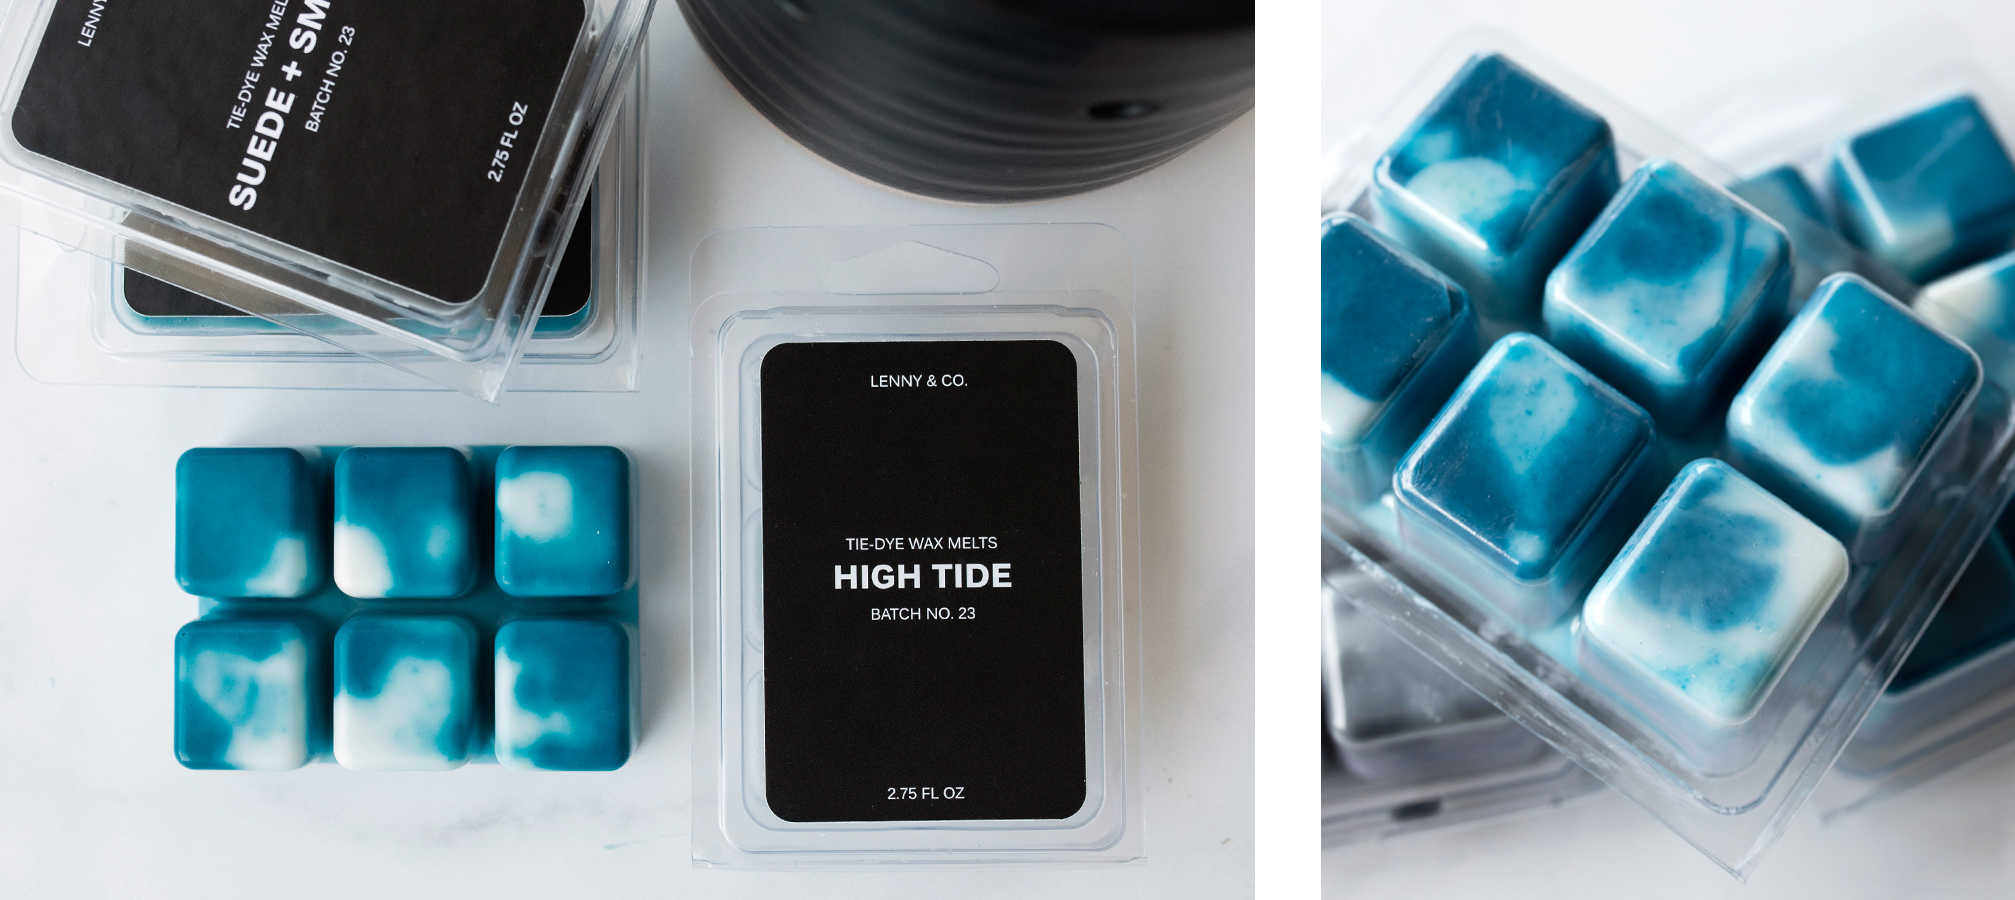 Teal and white tie-dye wax melt with clamshell containers and packaging.